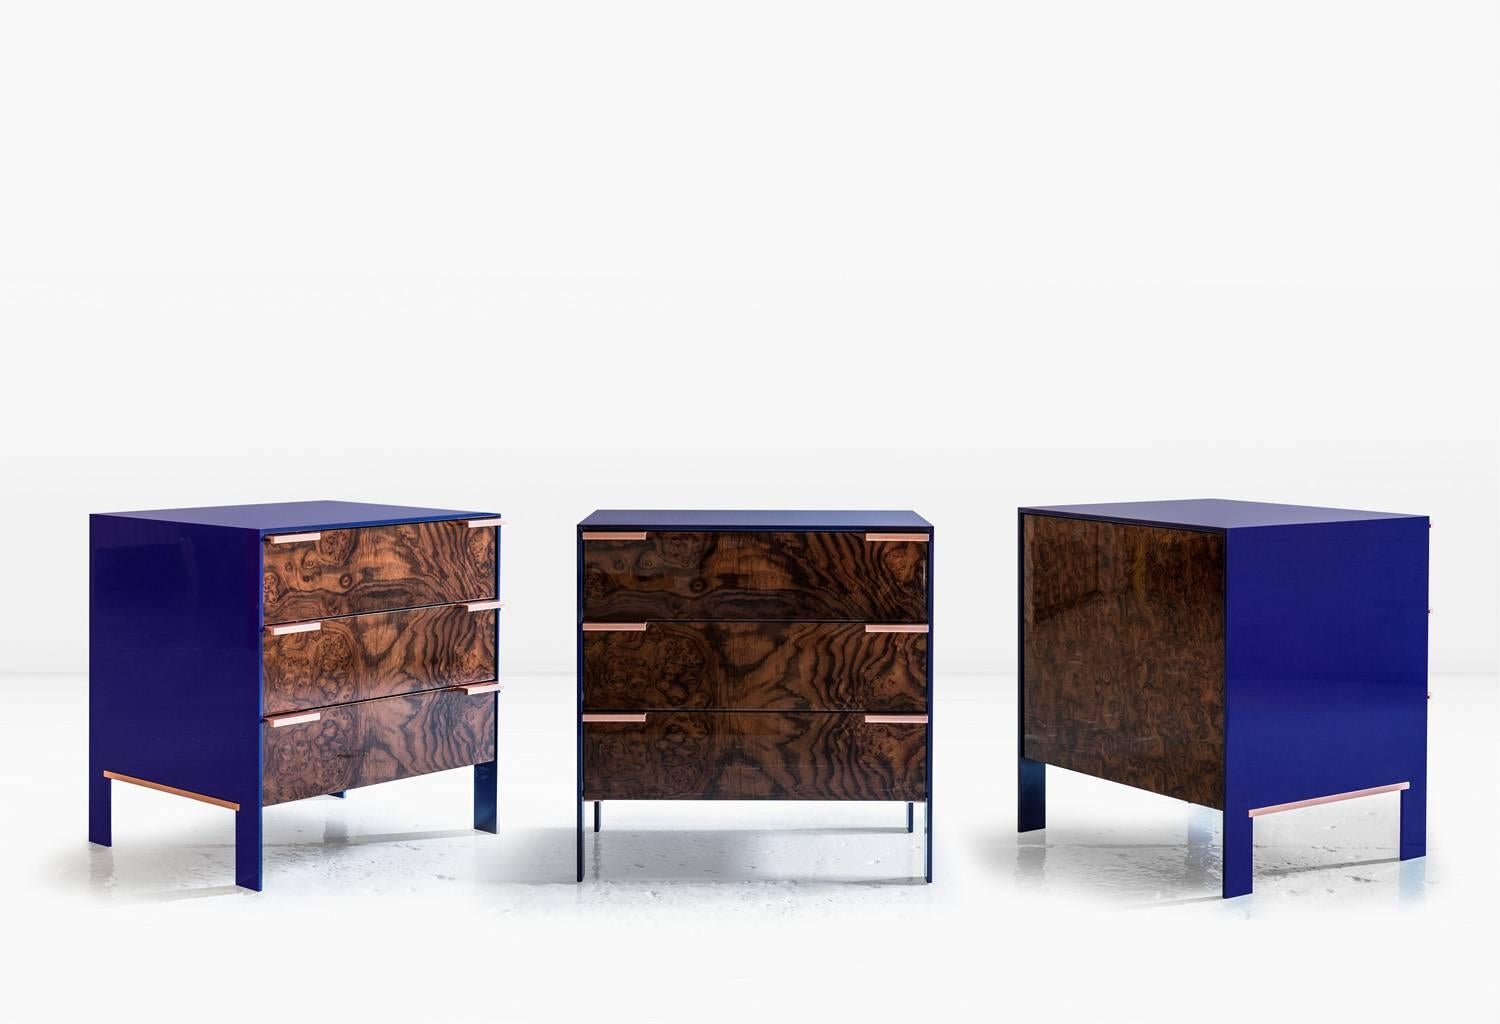 The Johansson cabinet, small has a skin of 1/2 inch lacquered aluminium encasing a cabinet constructed of highly polished wood veneer exteriors and solid wood interiors. Doors have solid metal pulls. Like all KGBL cabinetry, this piece is finished